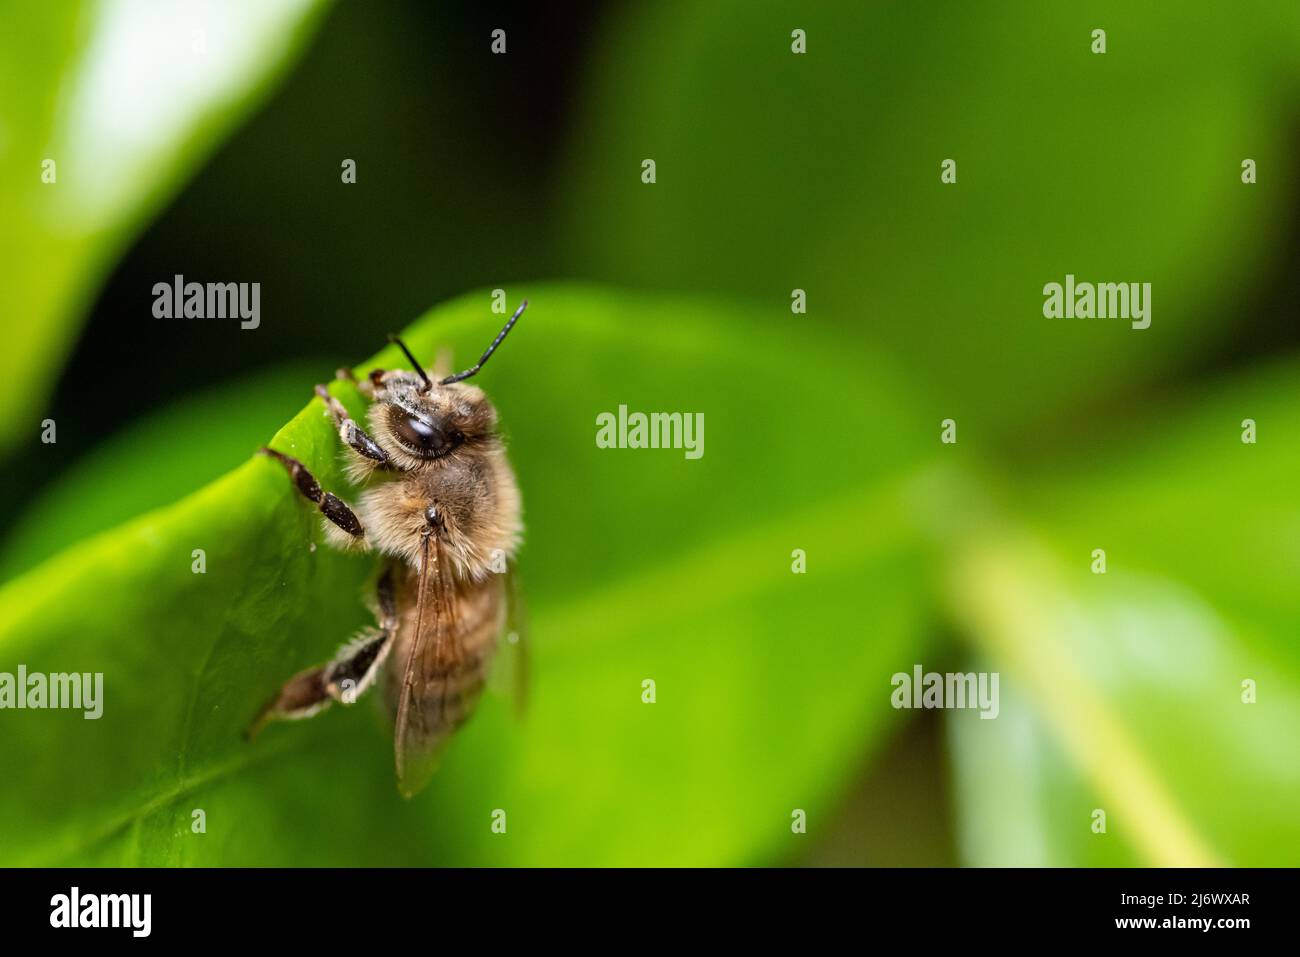 Honey bee on a green leaf of a Chinese star jasmine Stock Photo